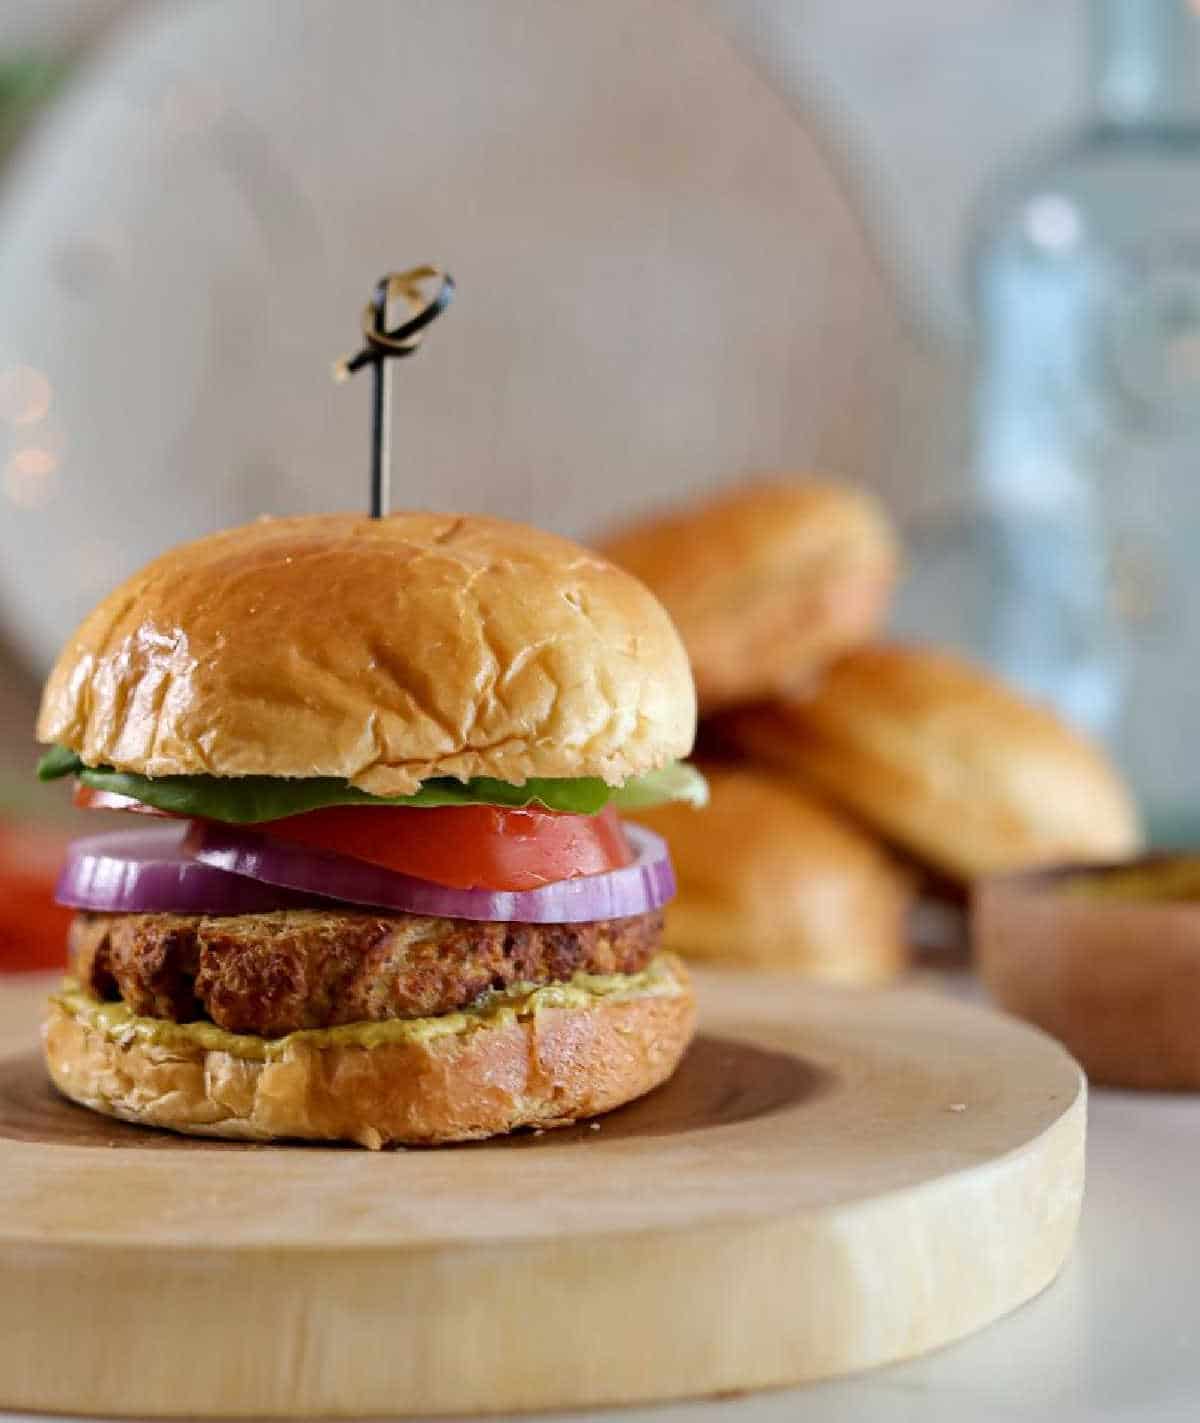 Tuna cakes stacked into a bun with some lettuce, tomato and red onion. A bamboo skewer is being used to hold it together.